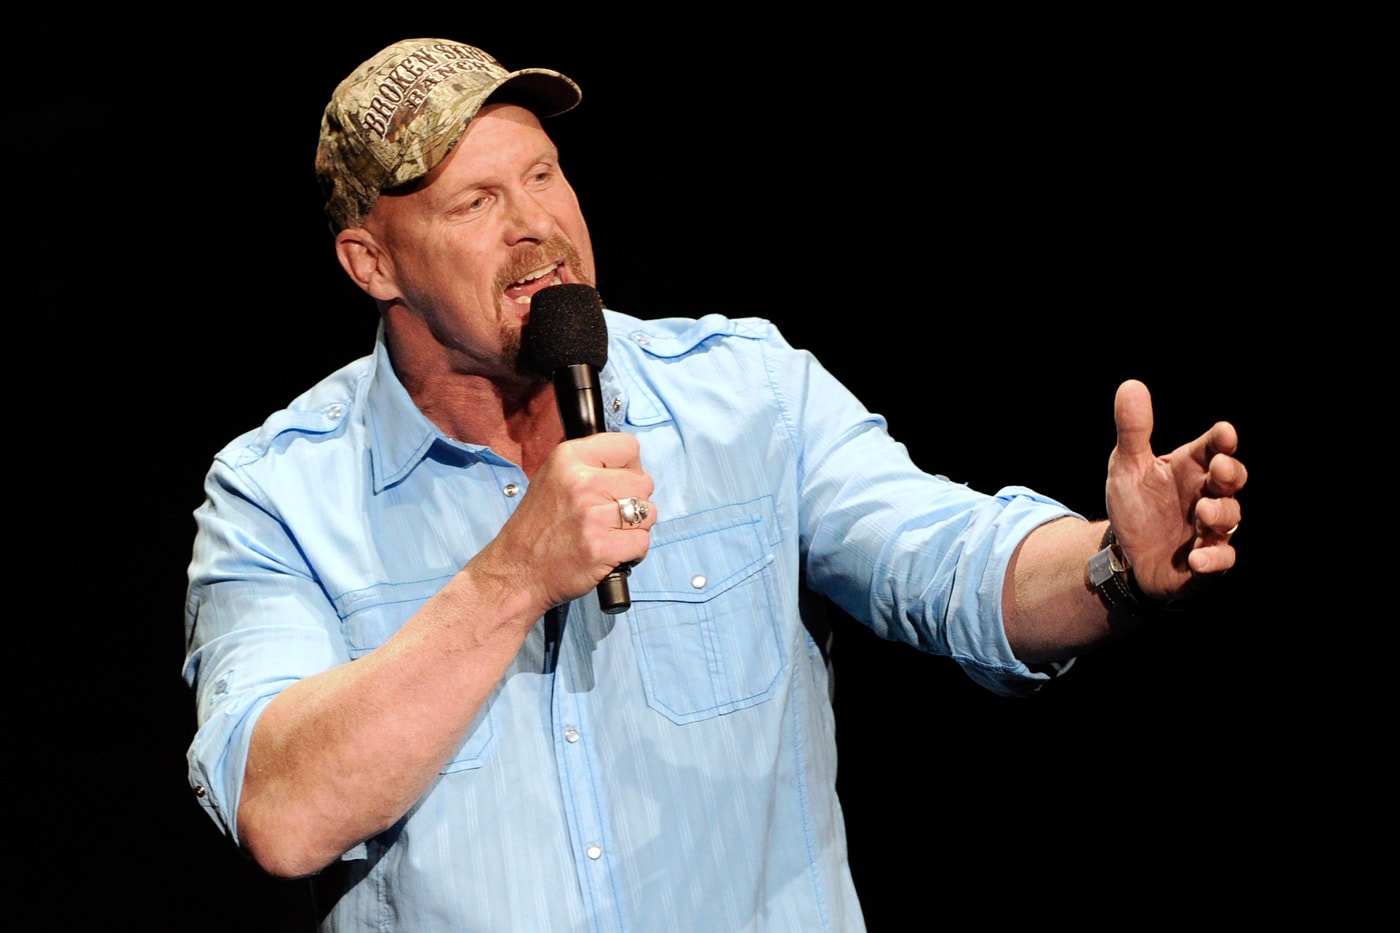 Stone Cold Steve Austin Is Getting a Talk Show WWE wrestling hall of famer Texas Rattlesnake 'Straight Up Steve Austin' August premiere date info when where who what USA Network bionic redneck 